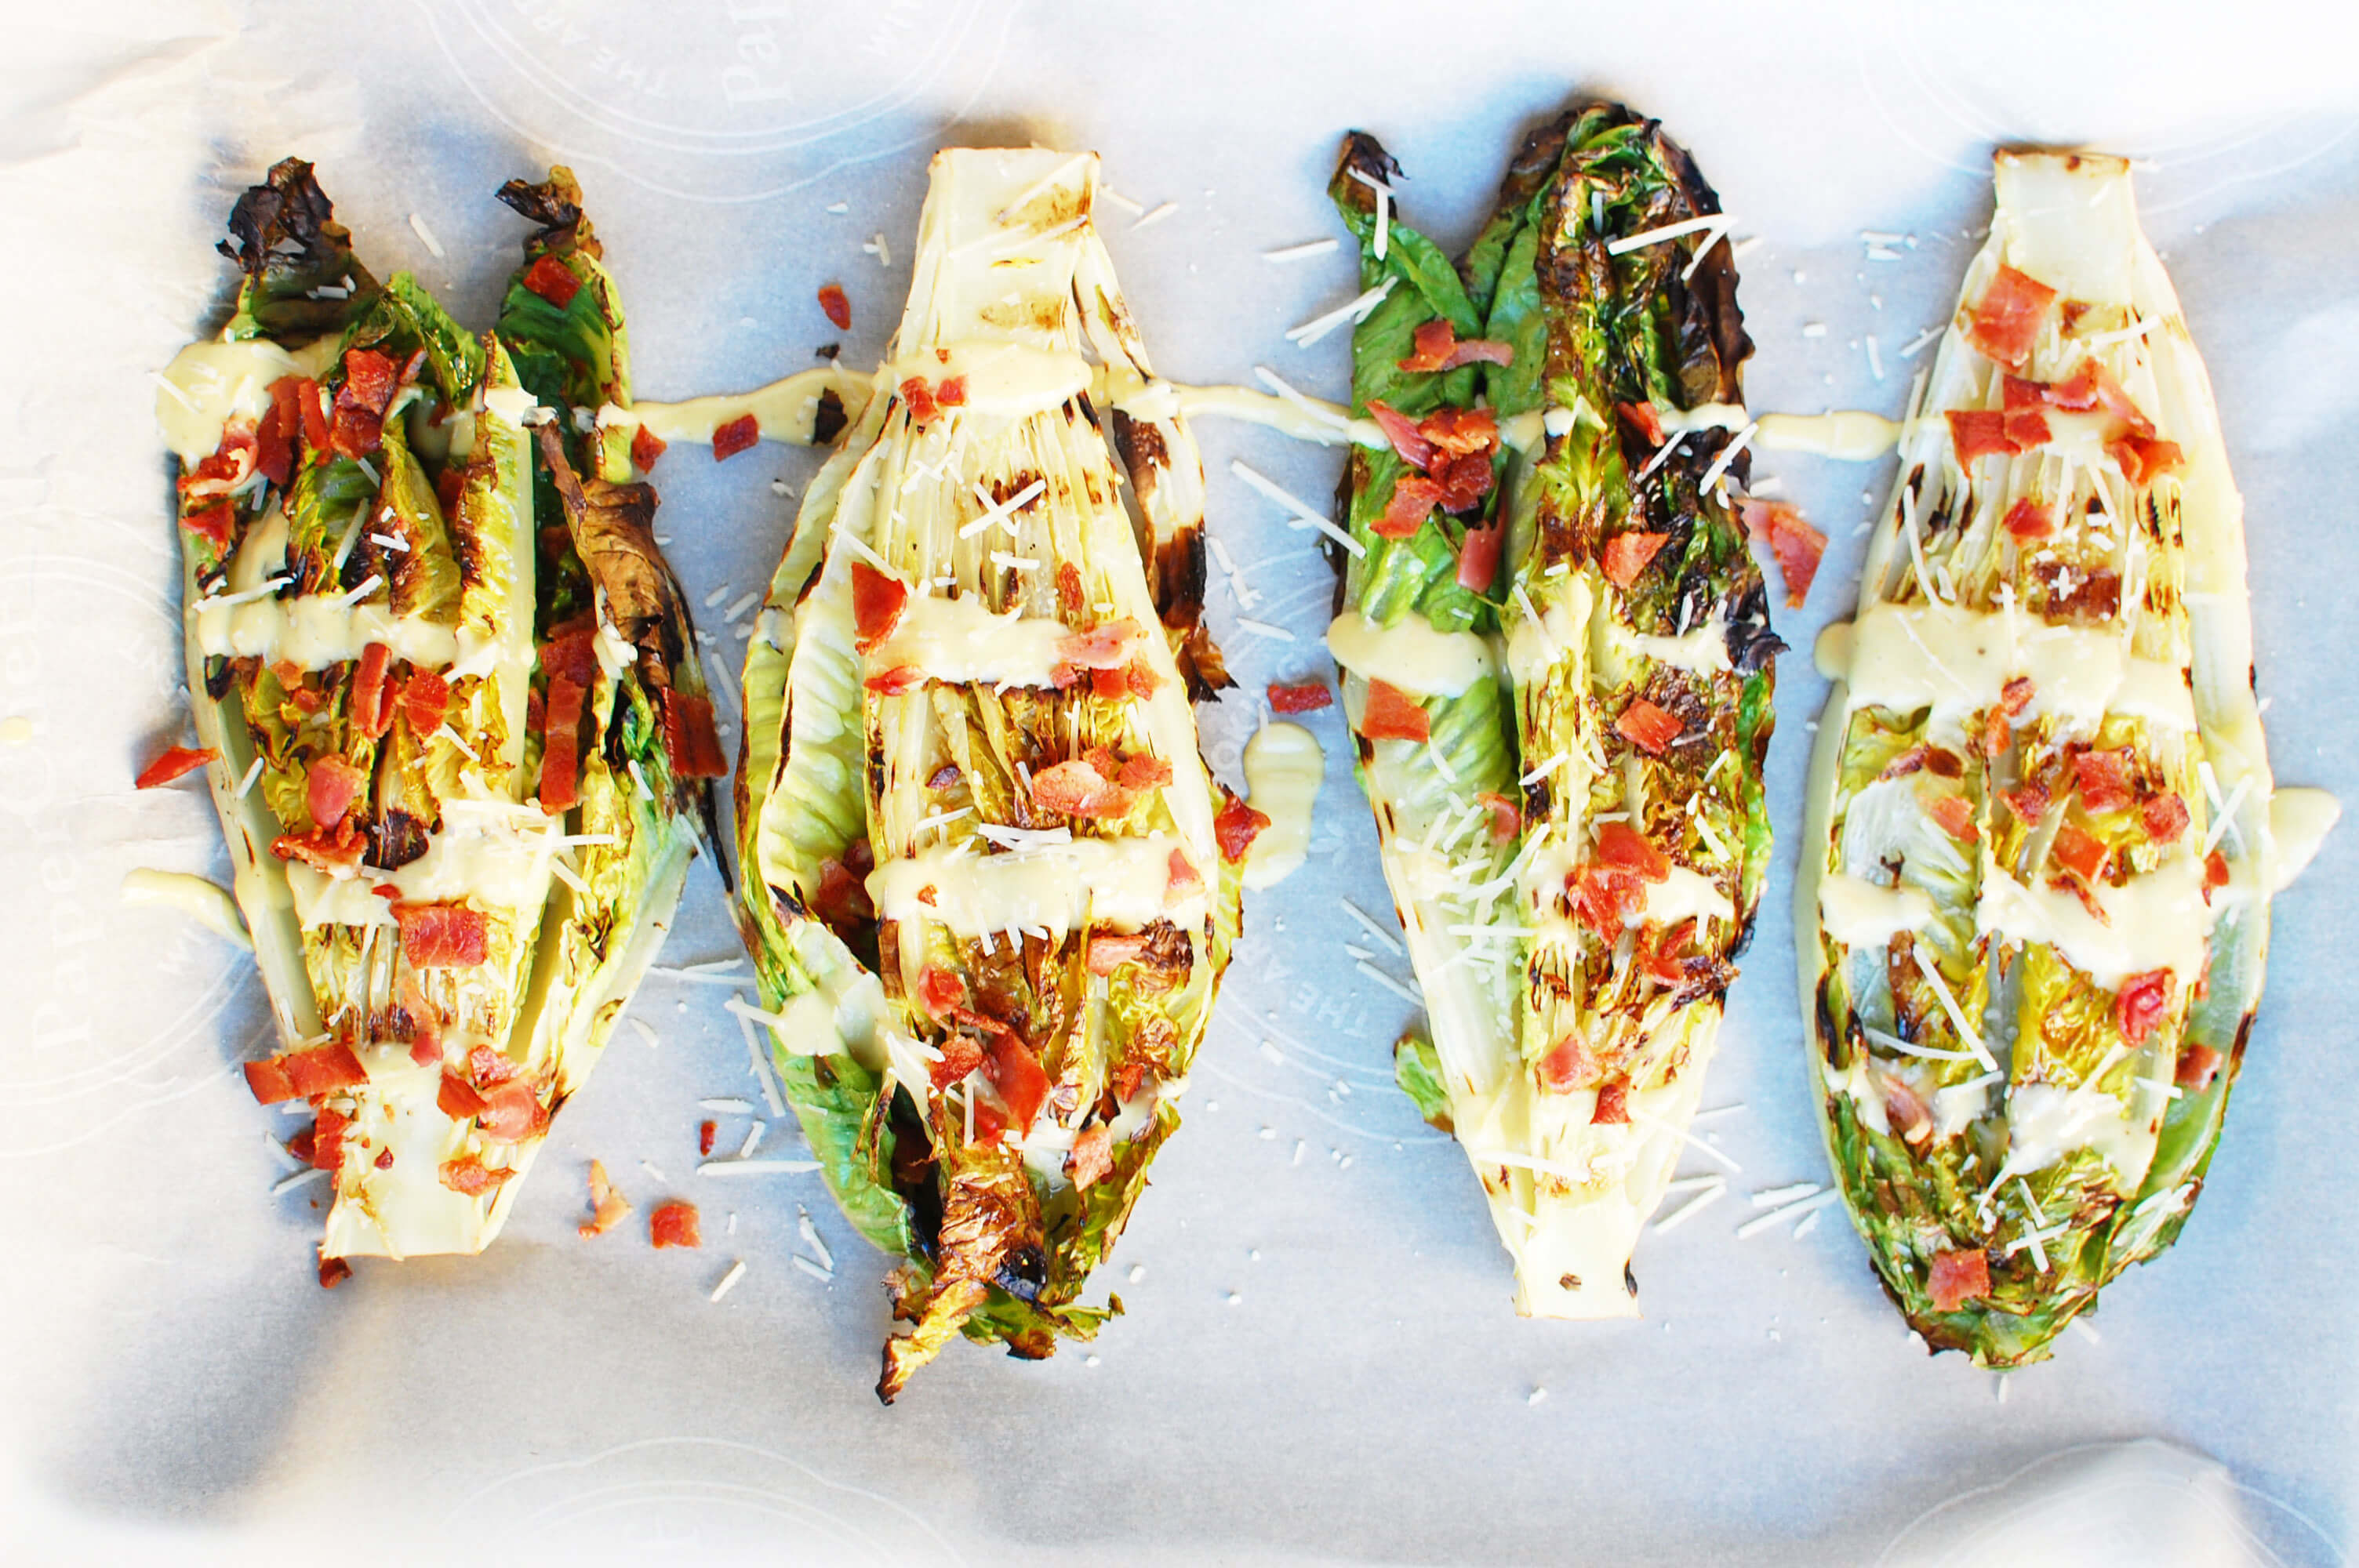 20 Meal Ideas Your Clients Can Grill This Summer: Grilled Caesar Salad